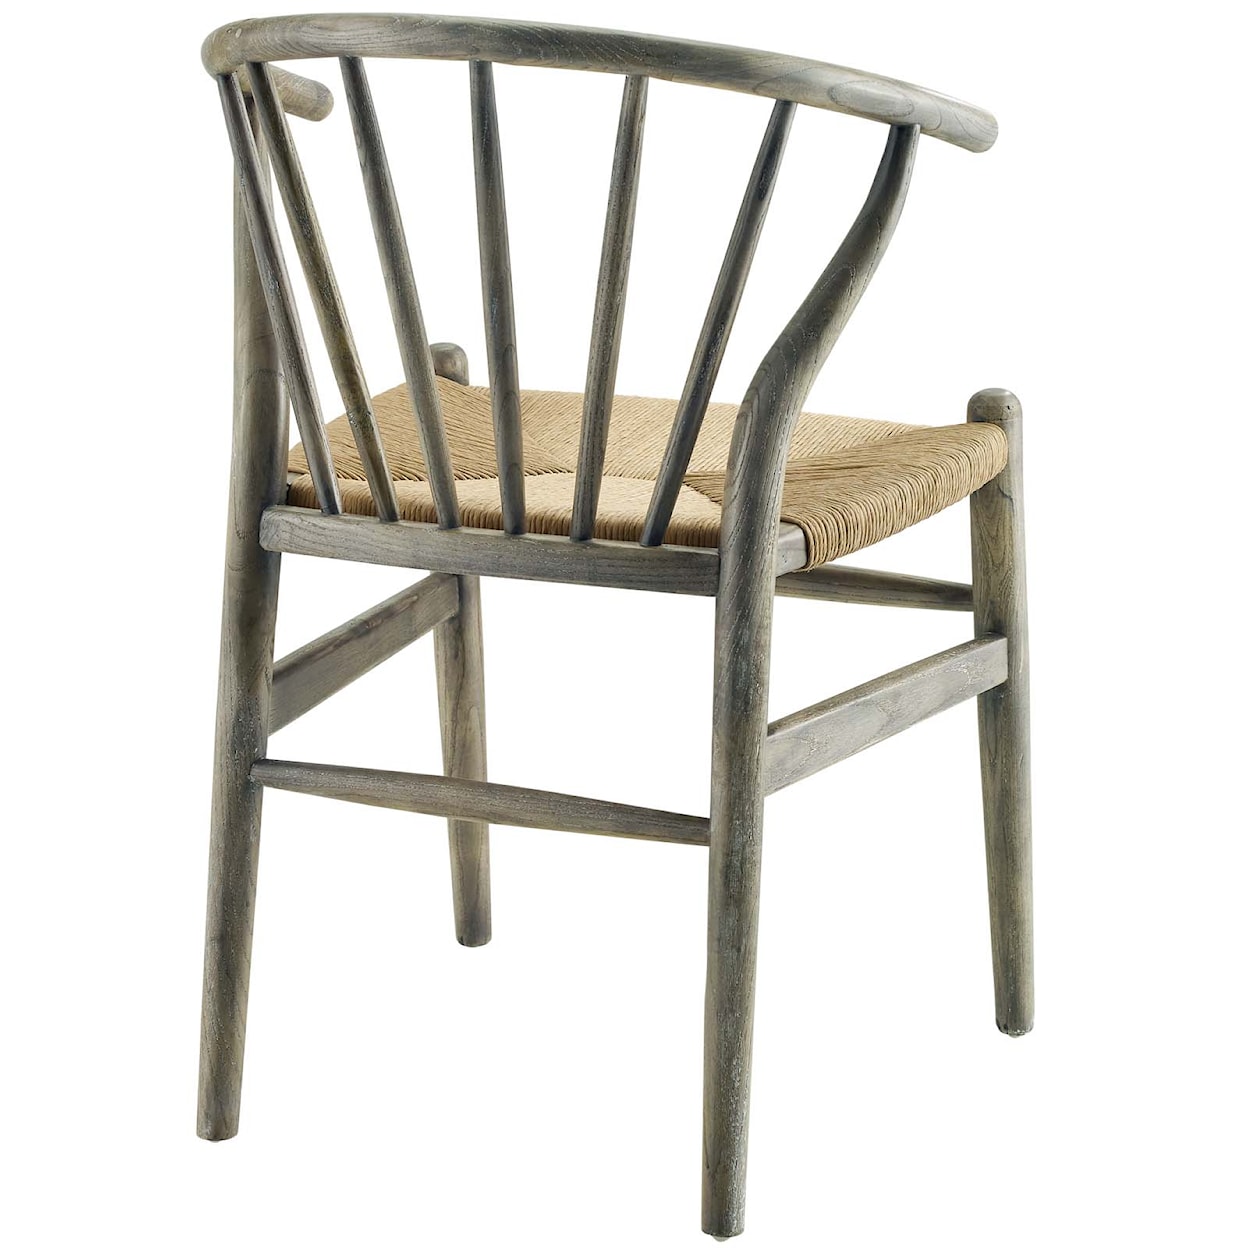 Modway Flourish Spindle Dining Side Chair